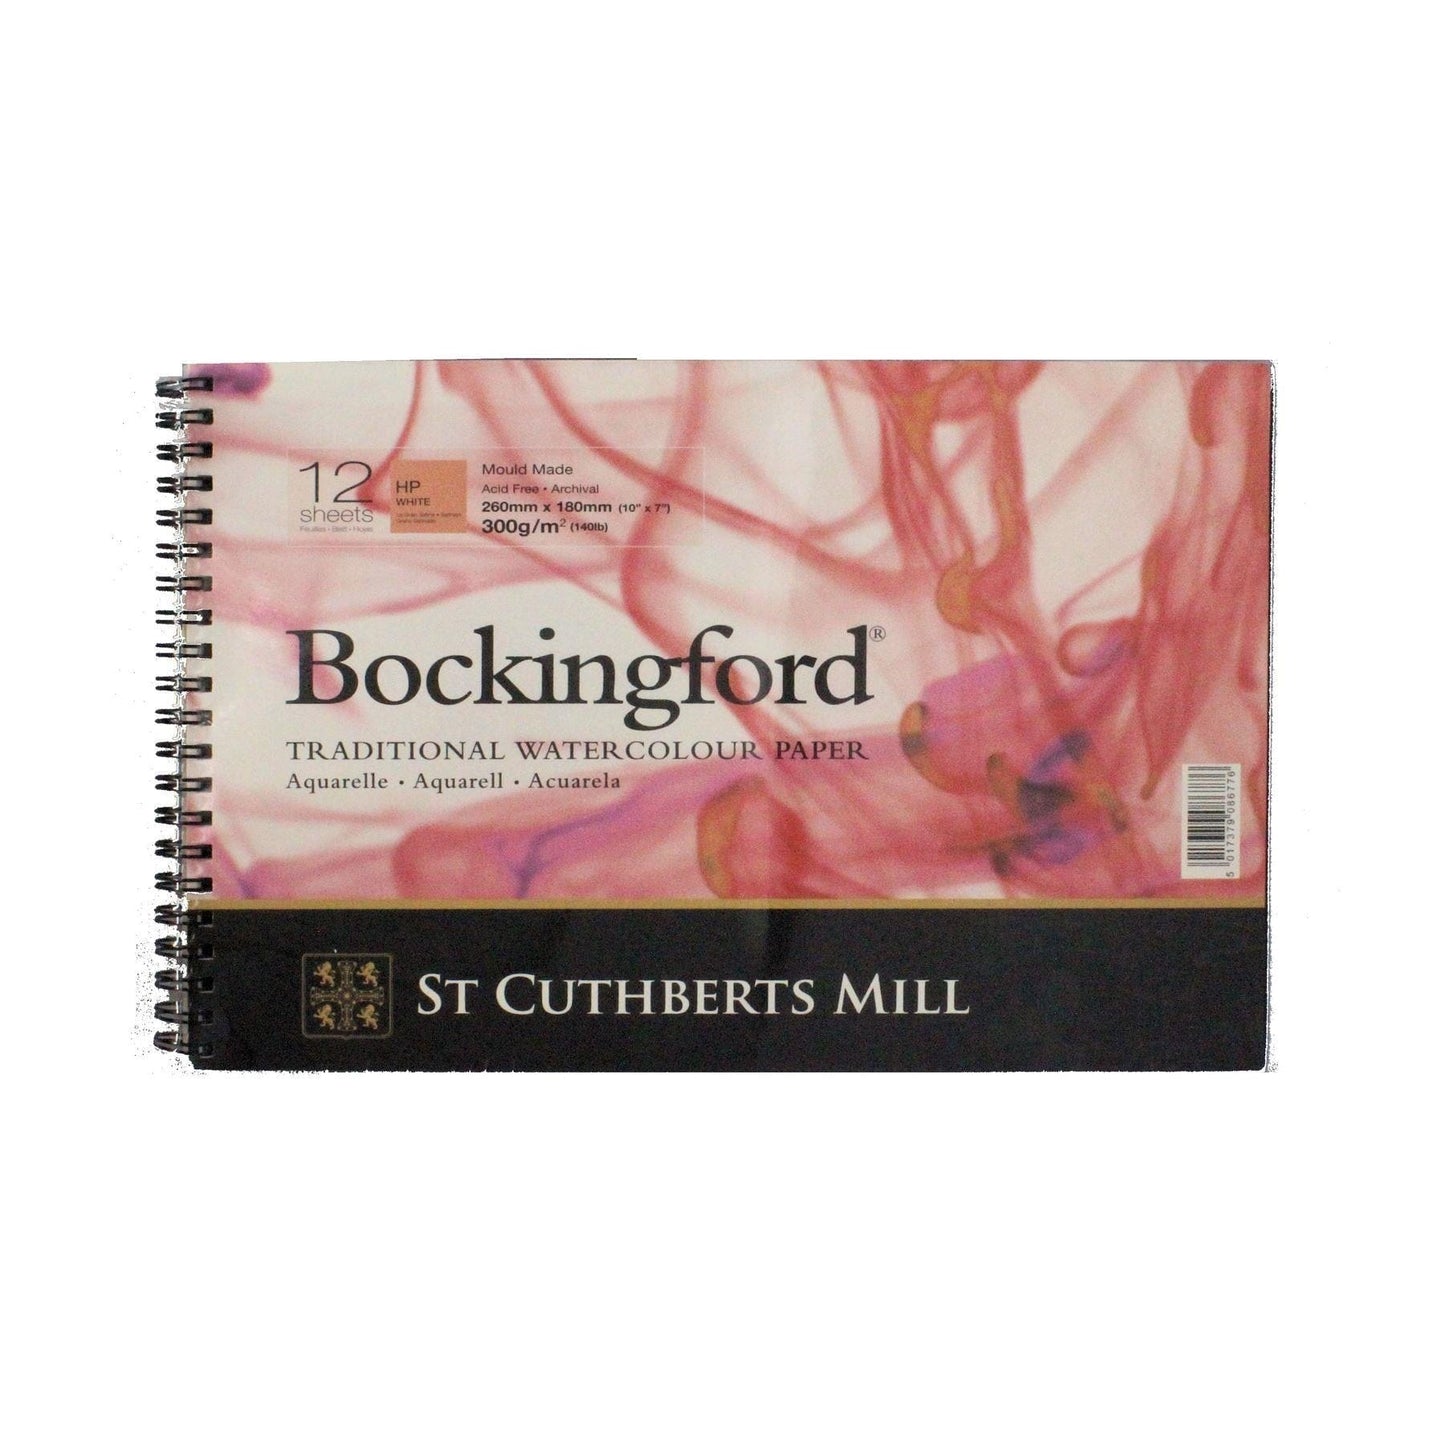 St. Cuthberts Mill Bockingford Watercolor Paper Spiral Pad - 12x9-Inch White Water Color Paper for Artists - 12 Sheets of 140lb Hot Press Watercolor